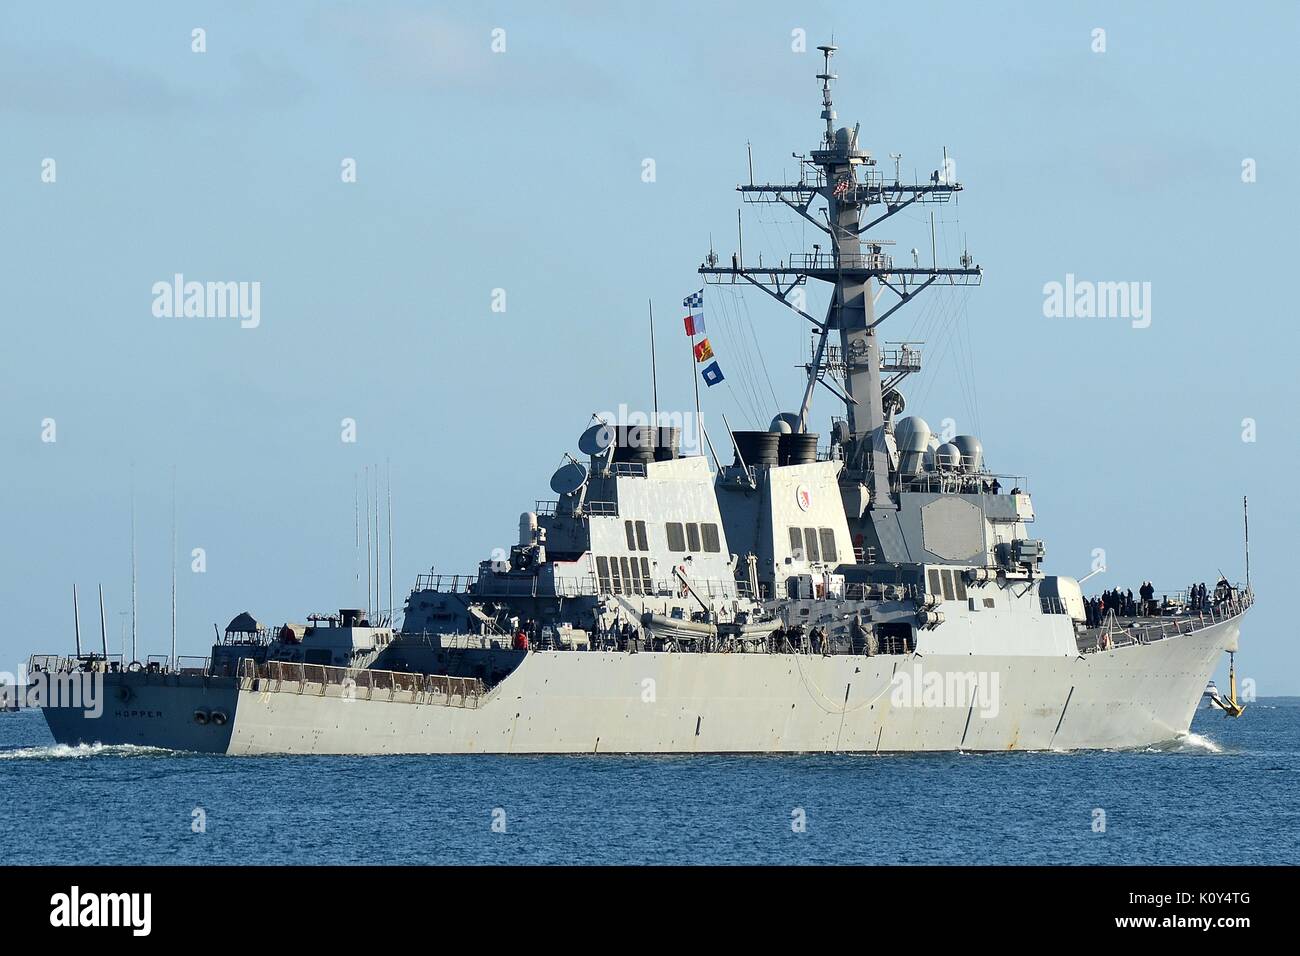 DDG-70 USS HOPPER, ARLEIGH BURKE CLASS GUIDED MISSILE DESTROYER OF THE U.S. NAVY Stock Photo